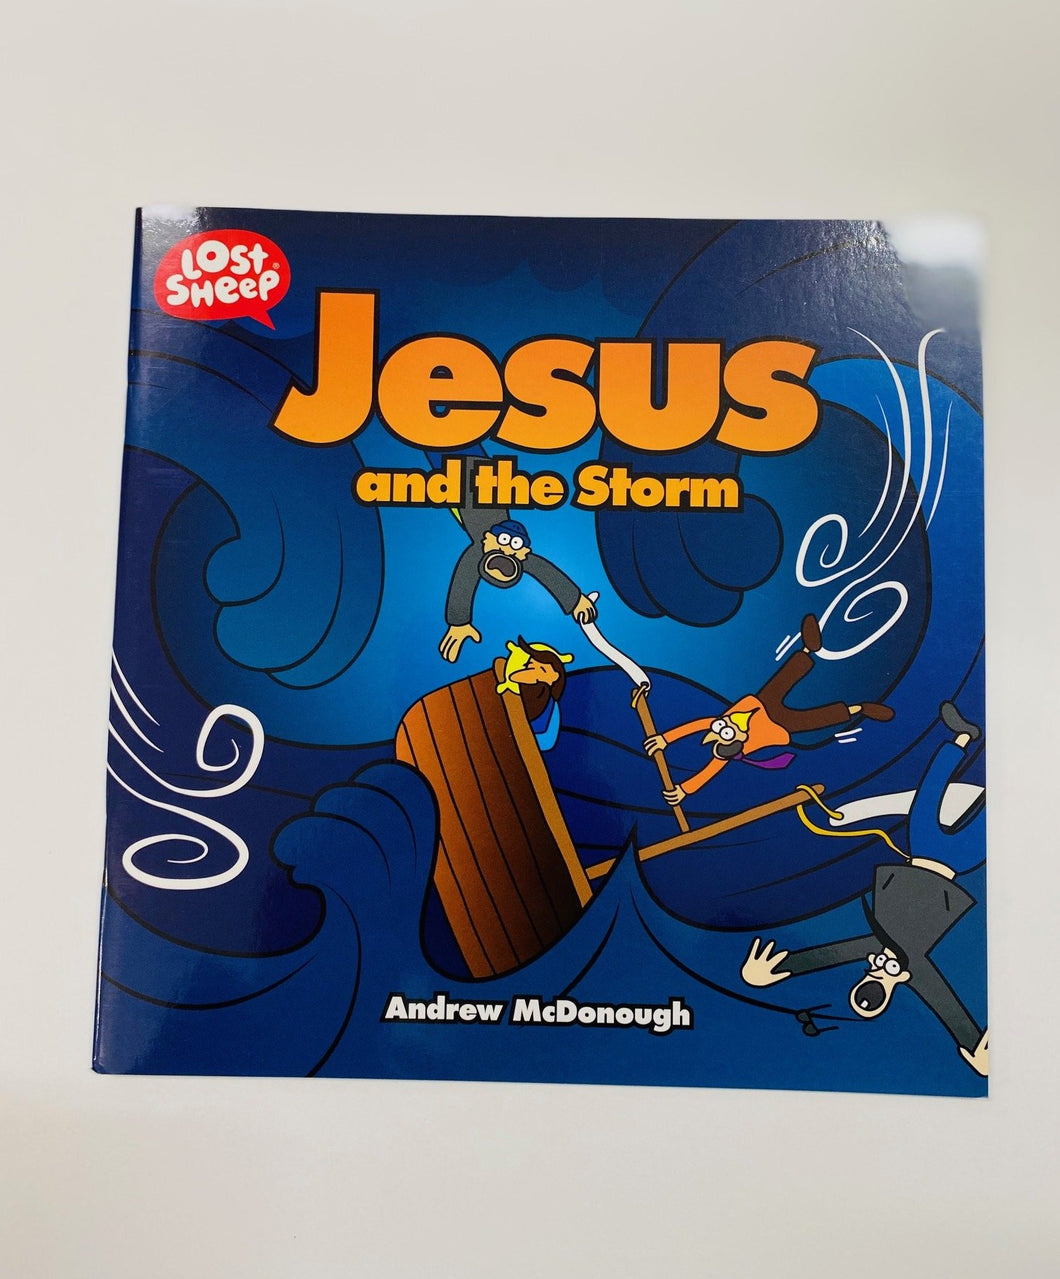 Lost Sheep: Jesus and the Storm